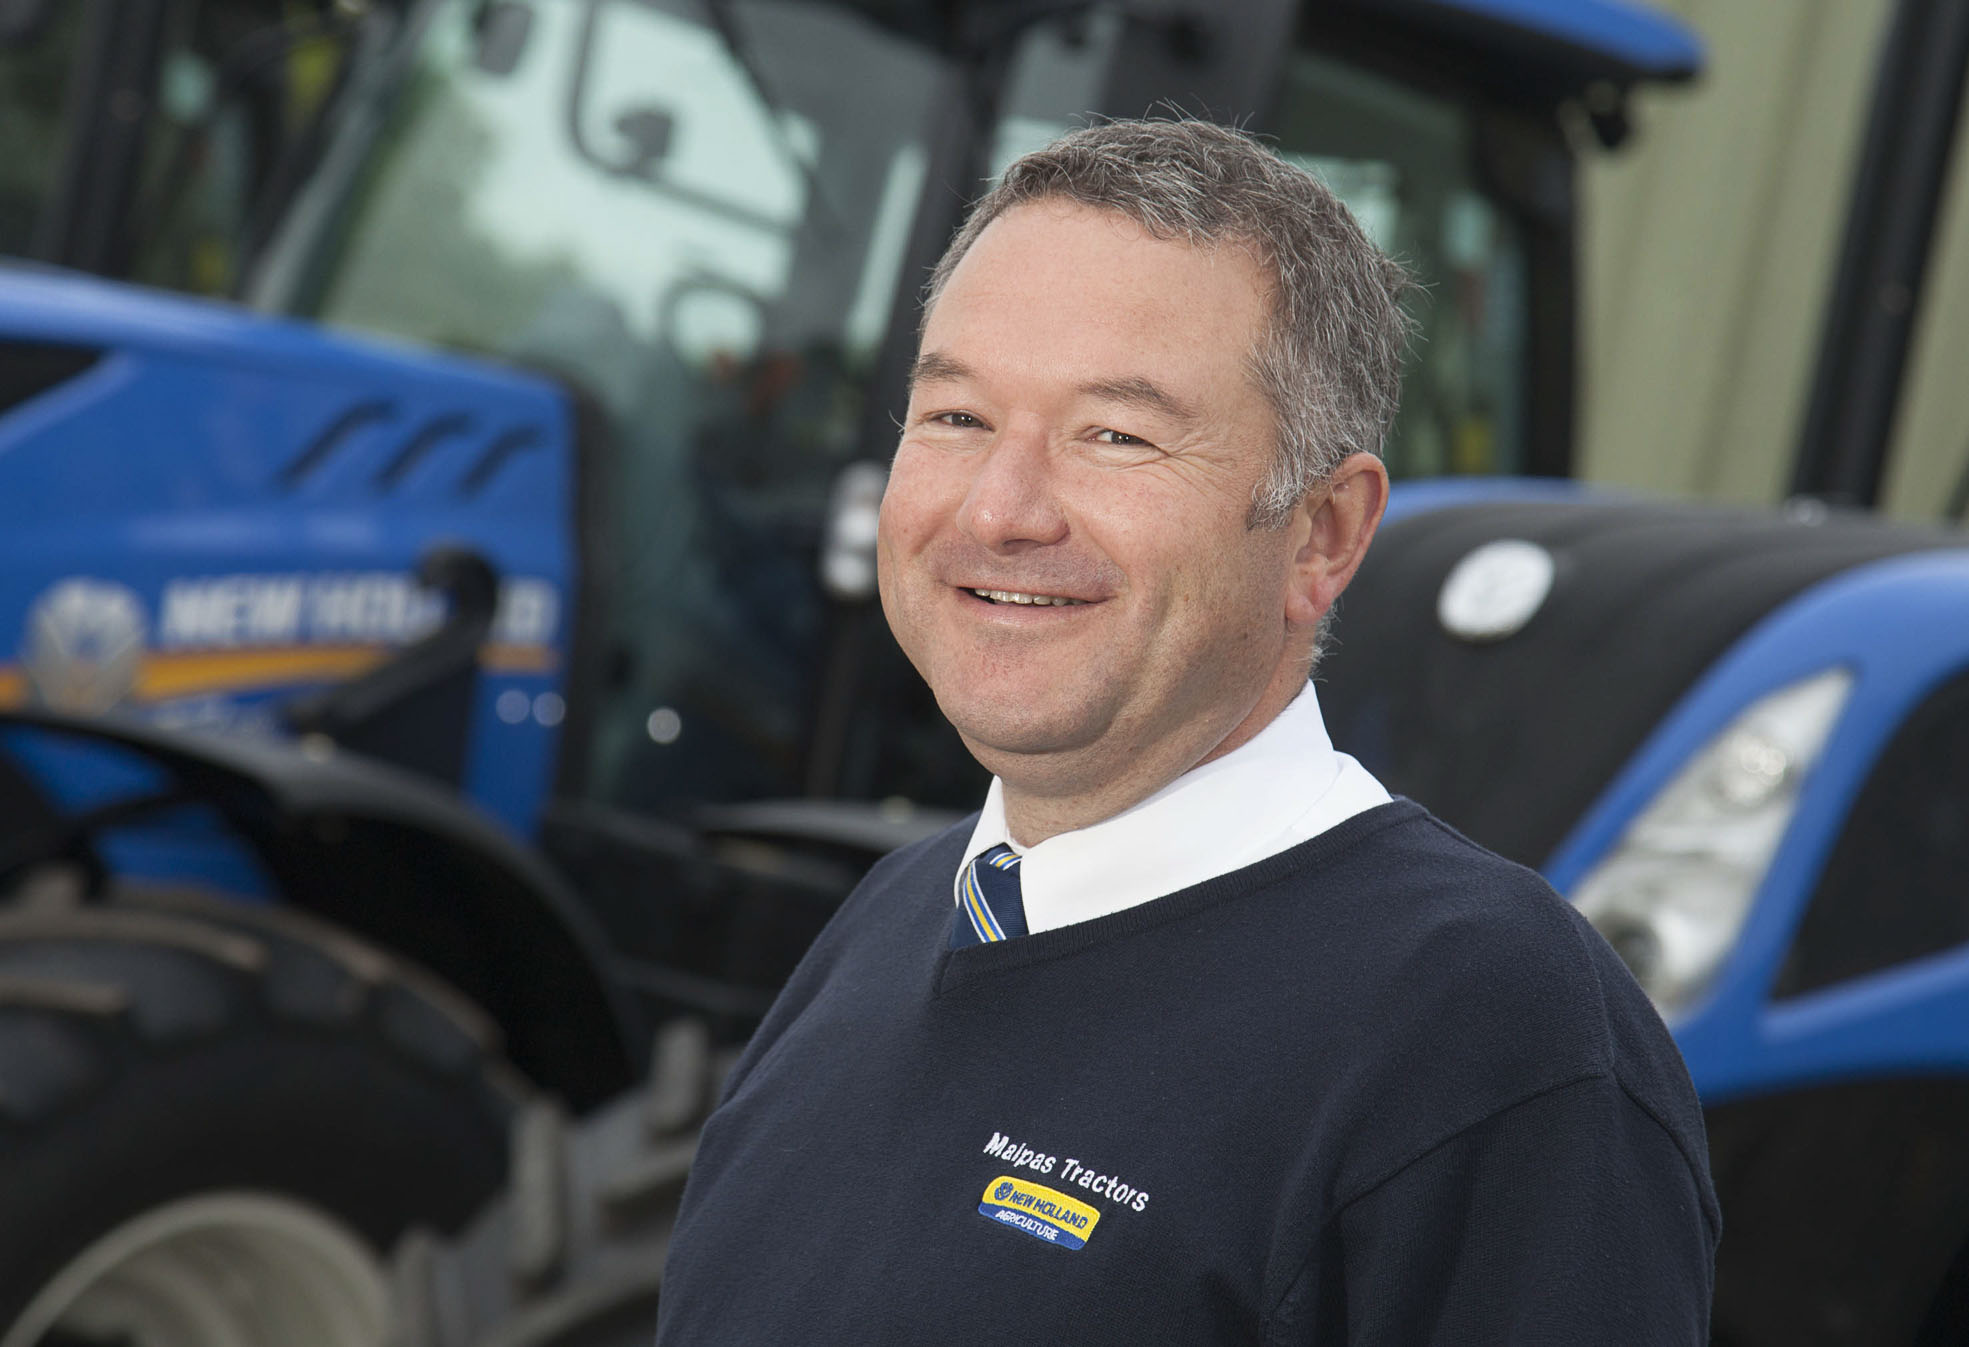 Agriculture is of growing importance to economy, boss of successful tractor firm will tell business leaders